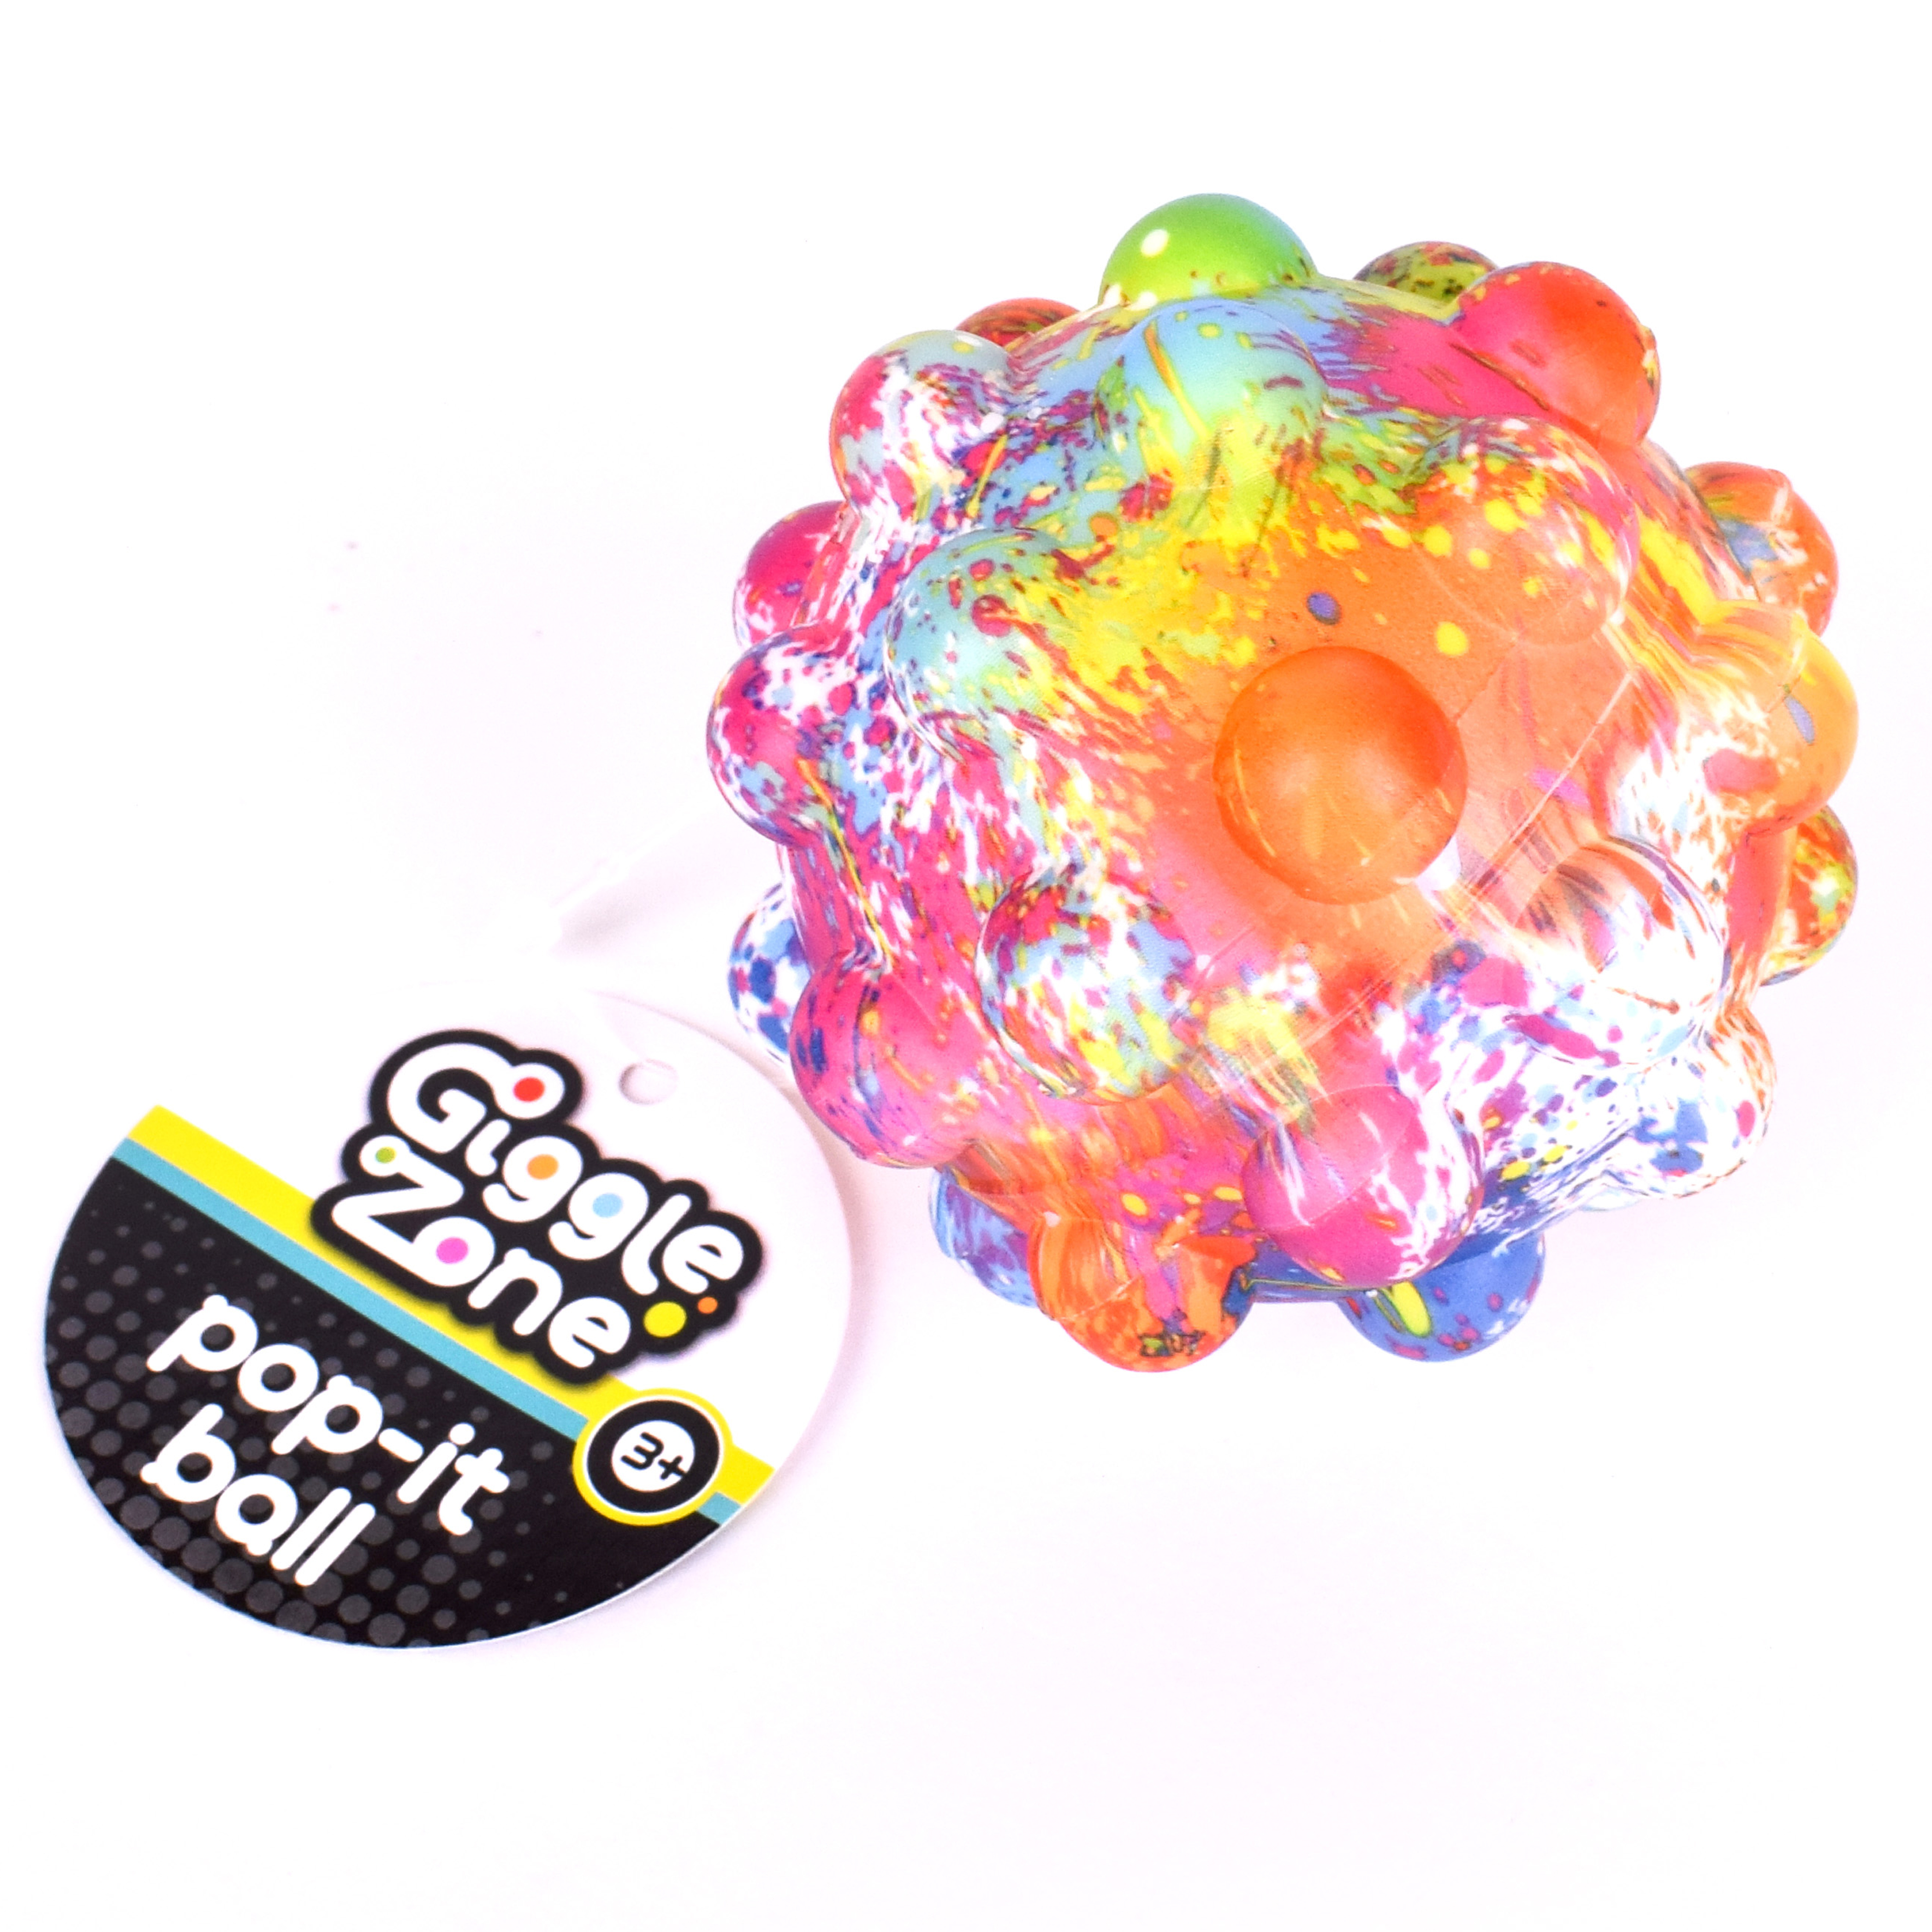 Giggle Zone Pop It Ball – Fidget Sensory Toy - Colors and Styles May Vary | Unisex, Ages 3+ - image 1 of 5